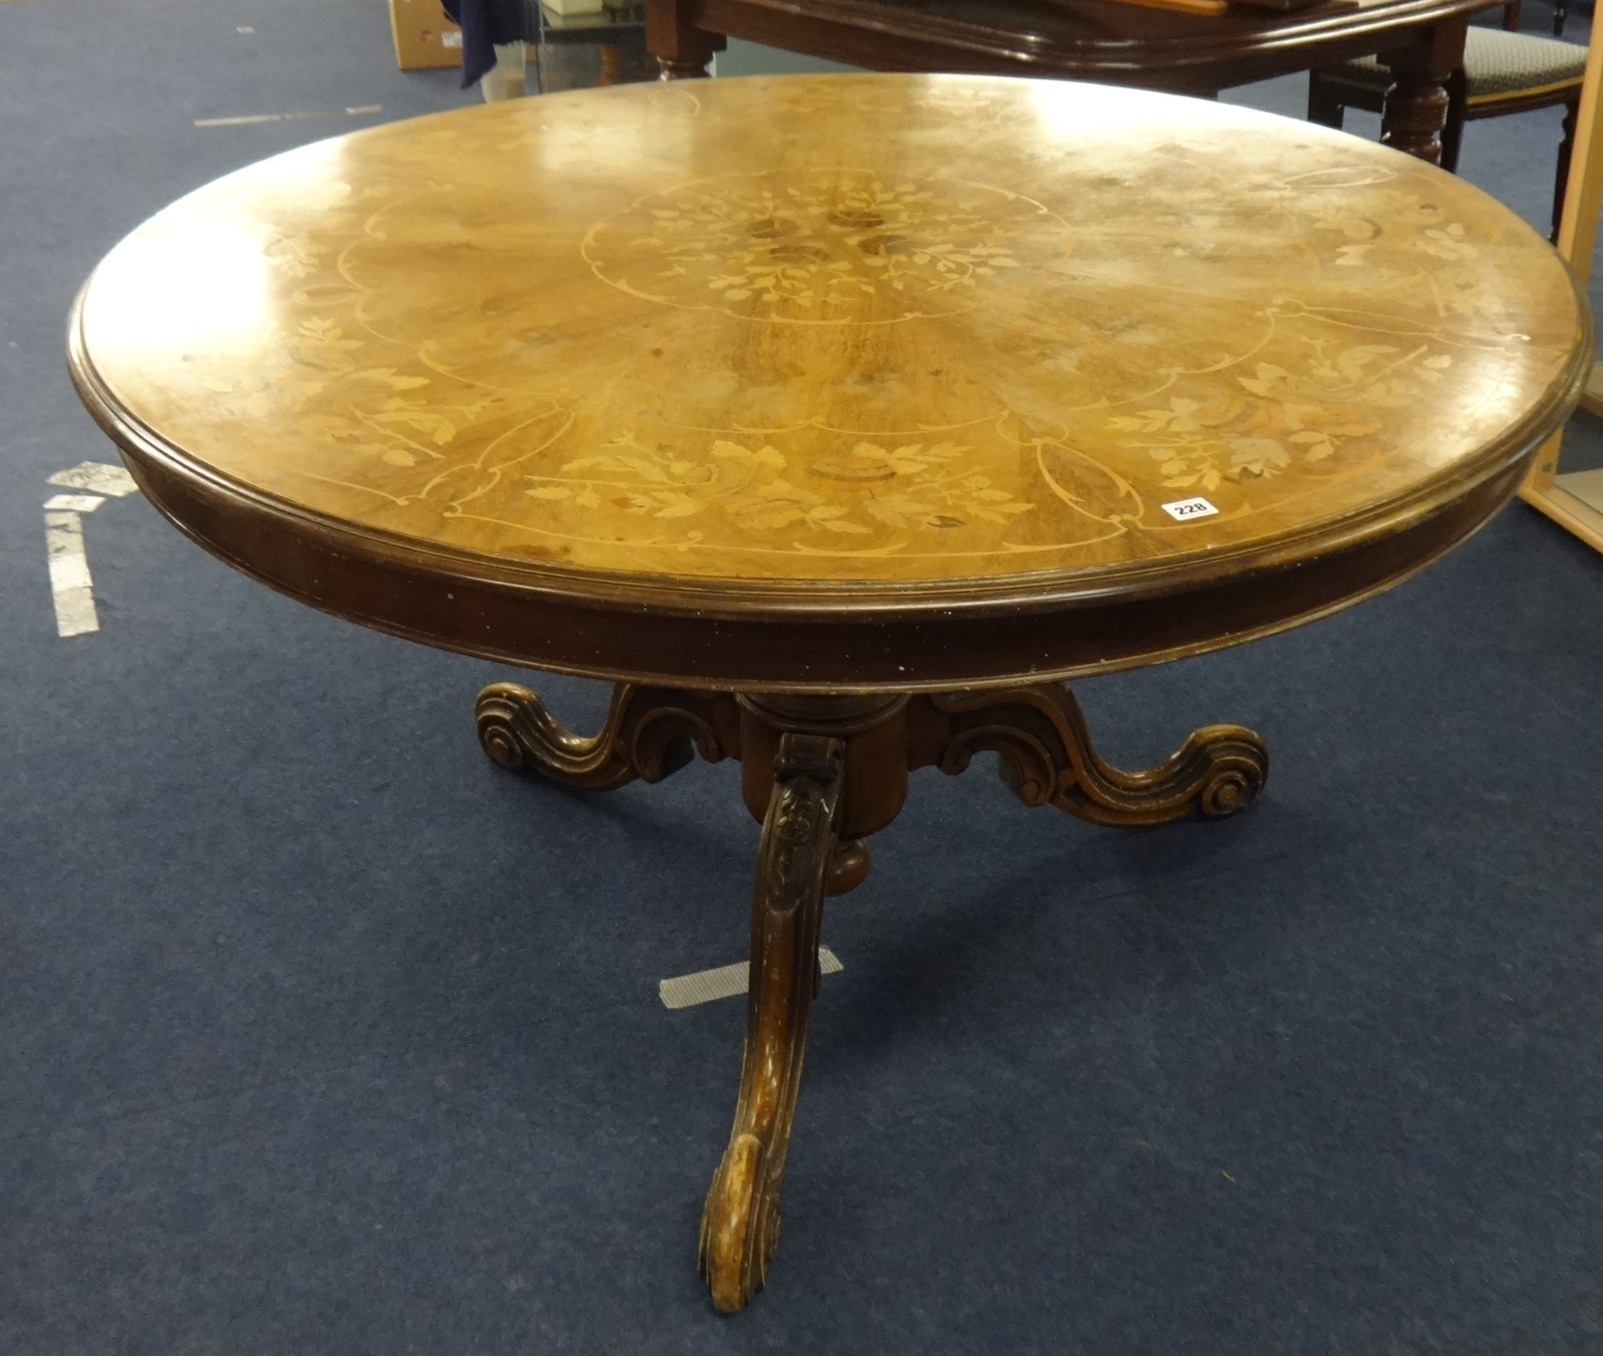 Victorian style circular breakfast table with a walnut and marquetry inlaid top on a carved tripod